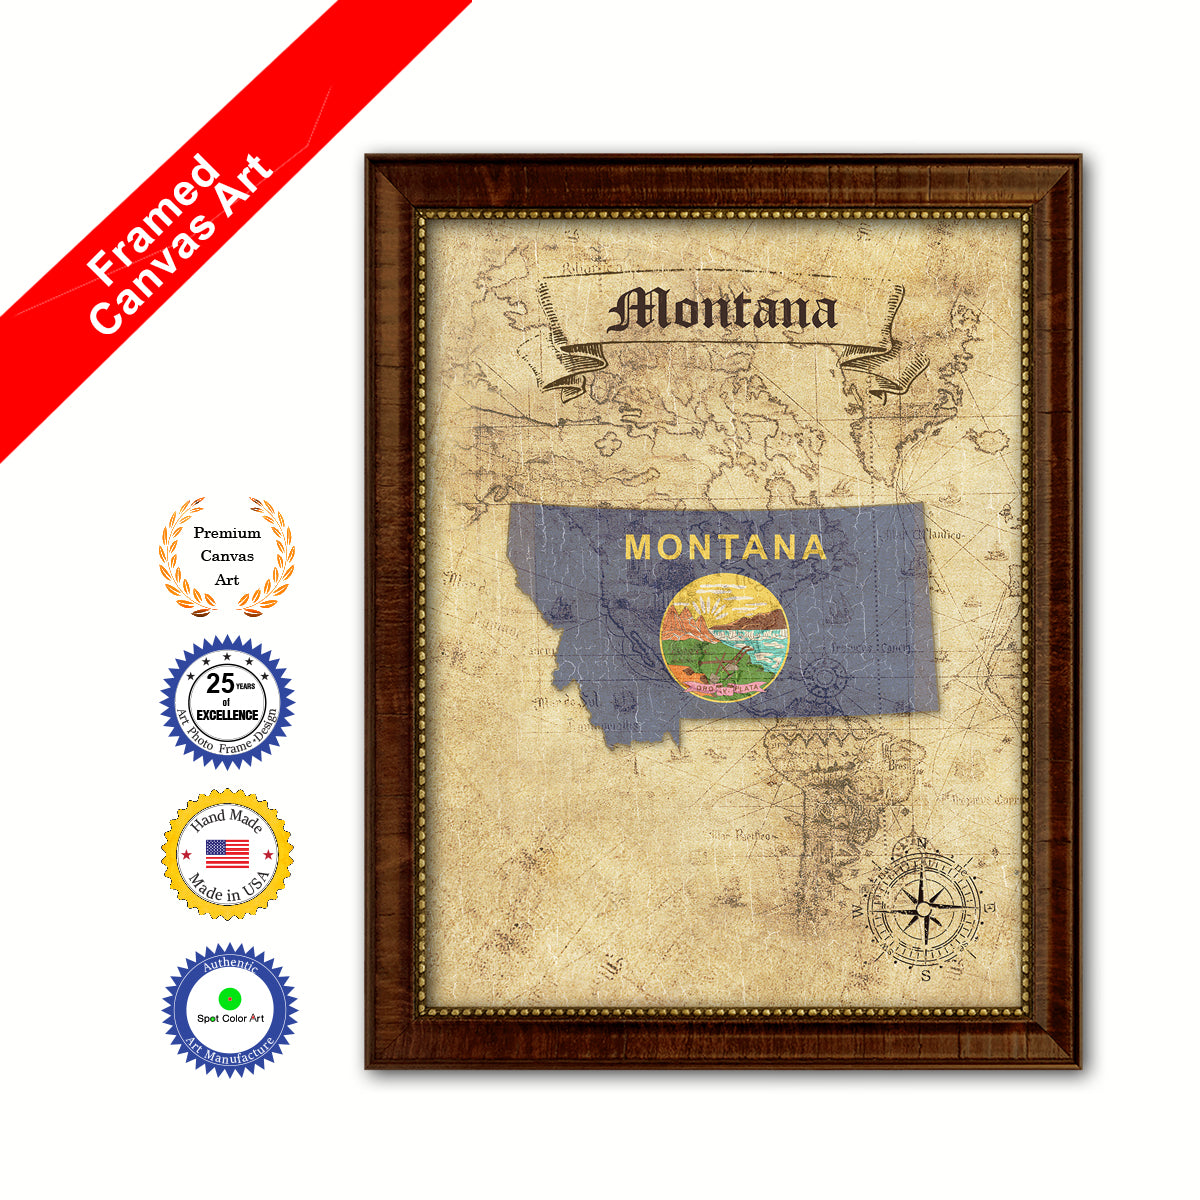 Montana State Vintage Map Brown Framed Canvas Print Home Decor Wall Art